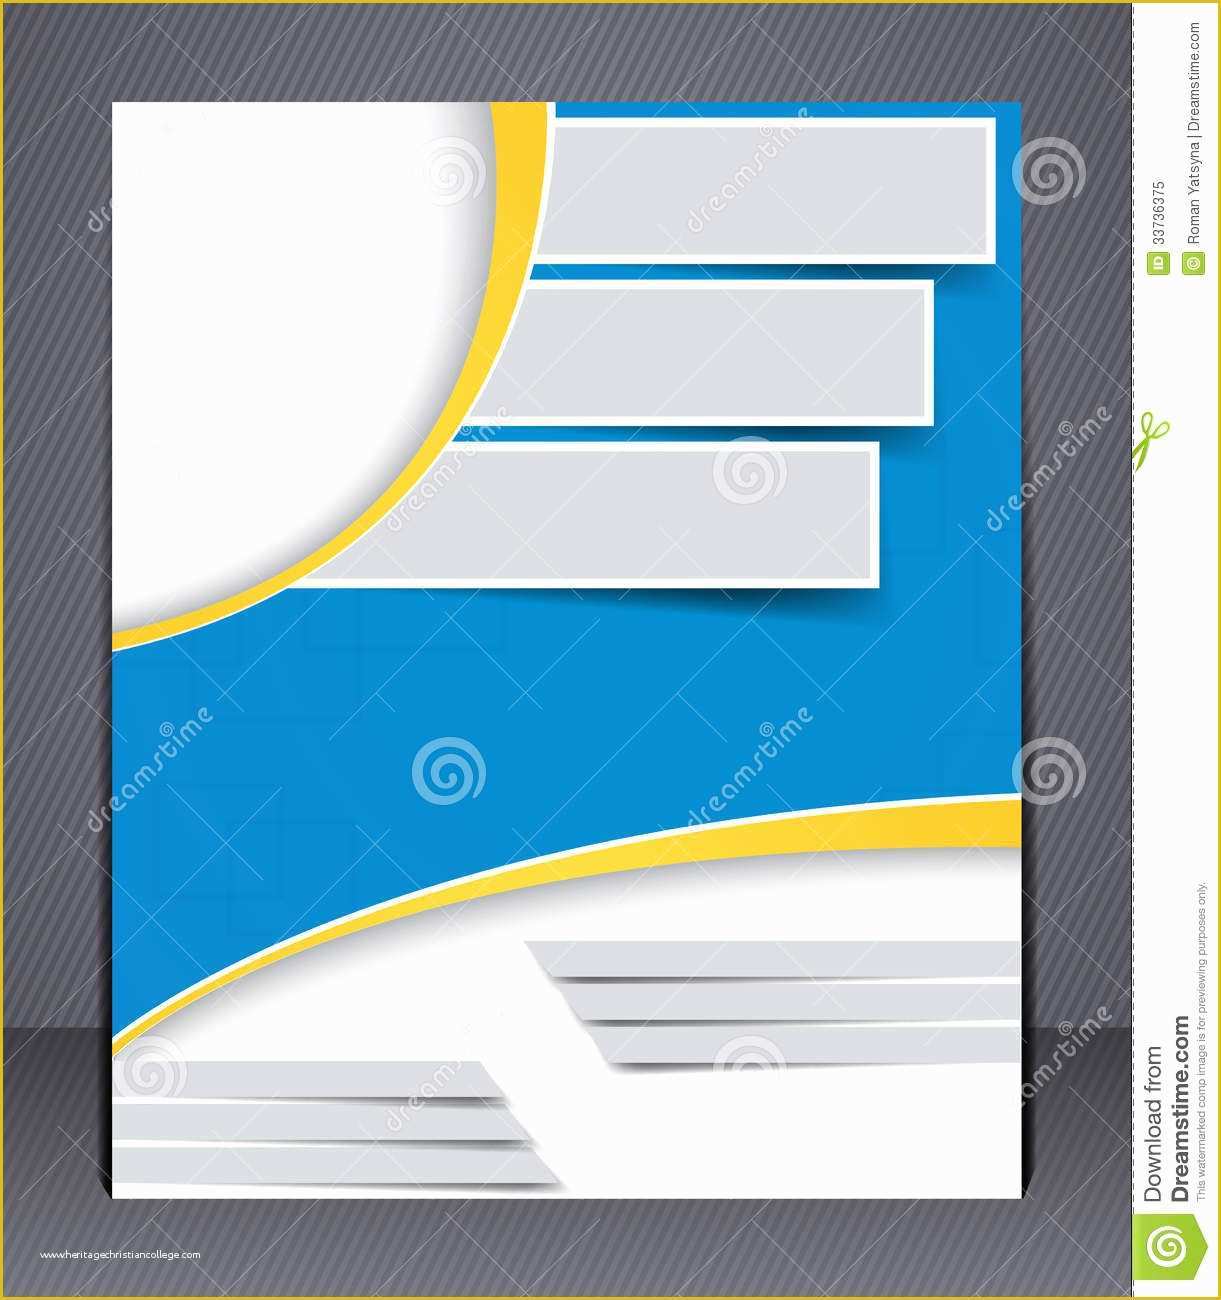 Free Handout Templates Of Brochure Design In Blue and Yellow Colors Stock Vector